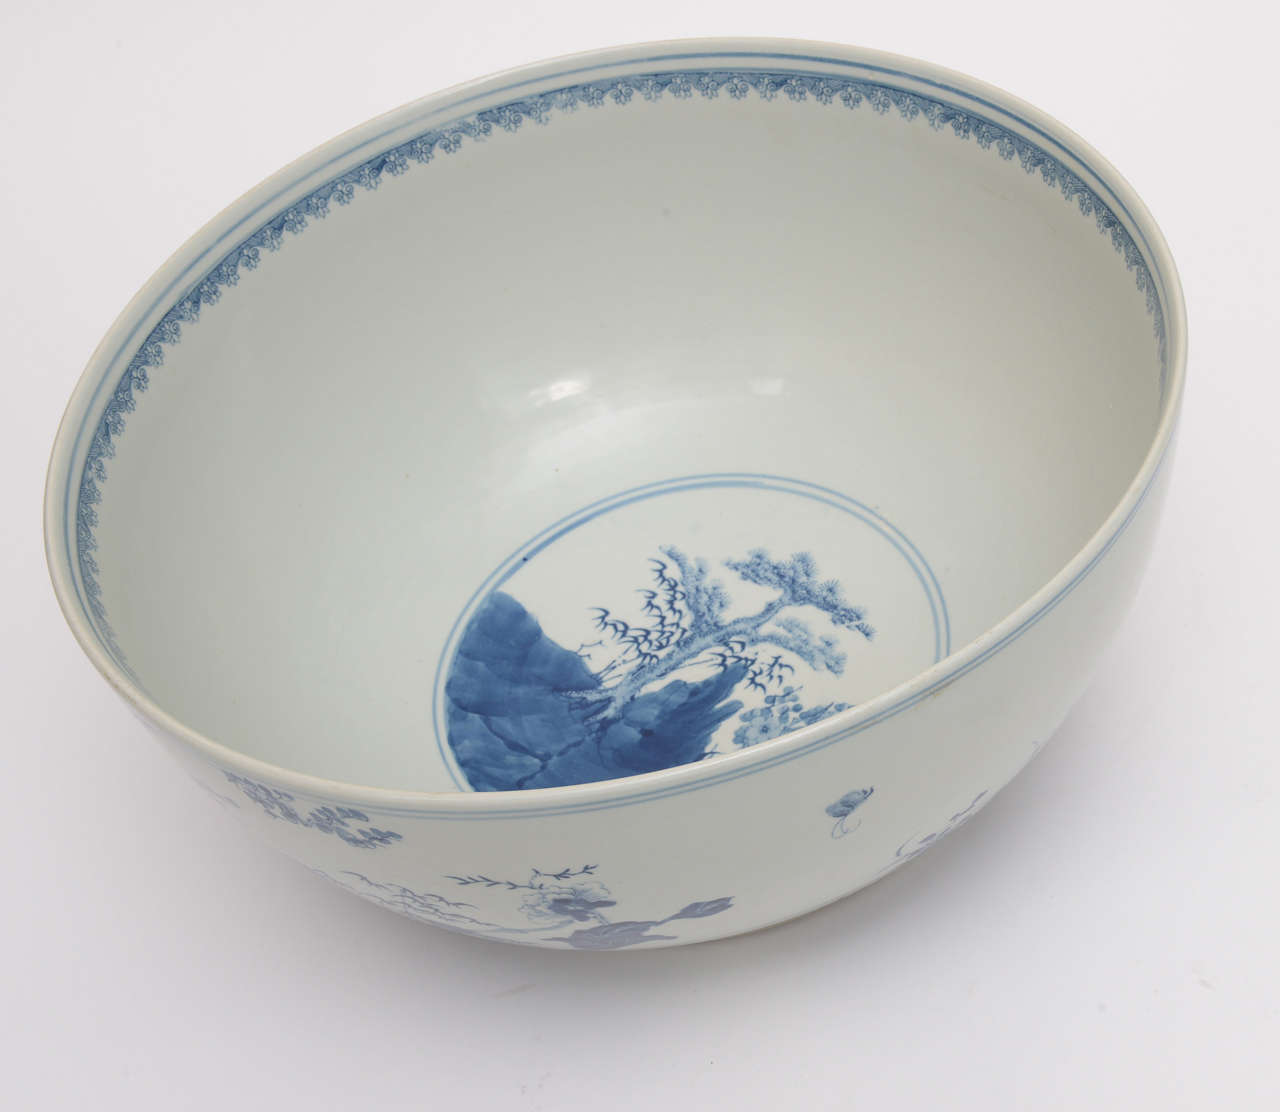 Pair of Large Blue and White Oriantal Bowls 5